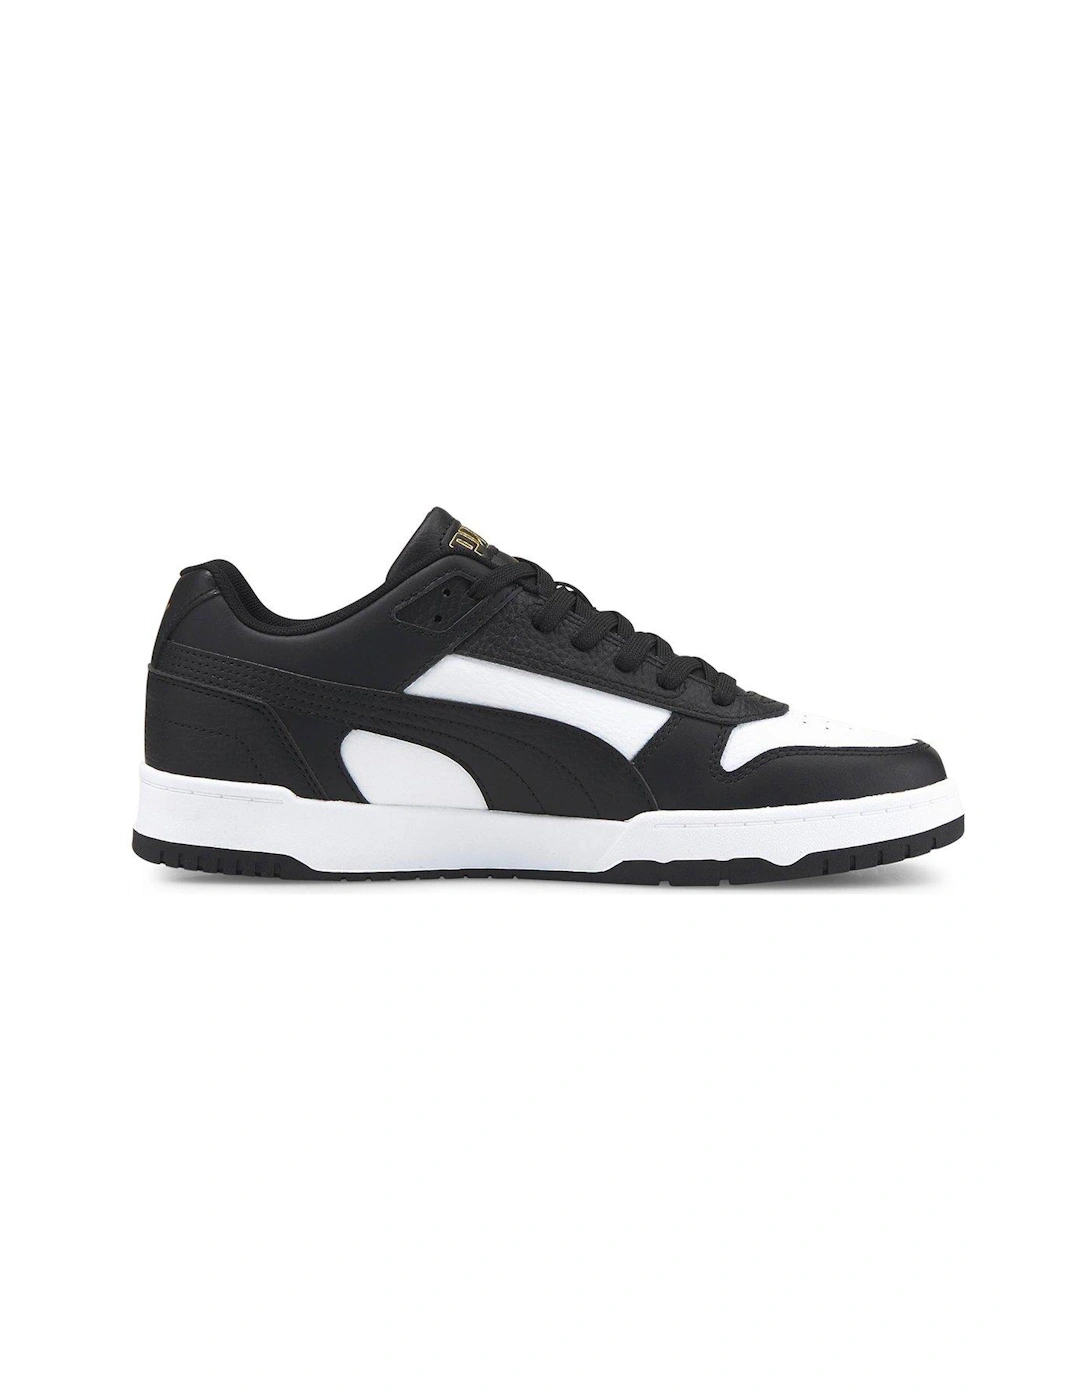 Womens Rebound Game Low Trainers - White/Black